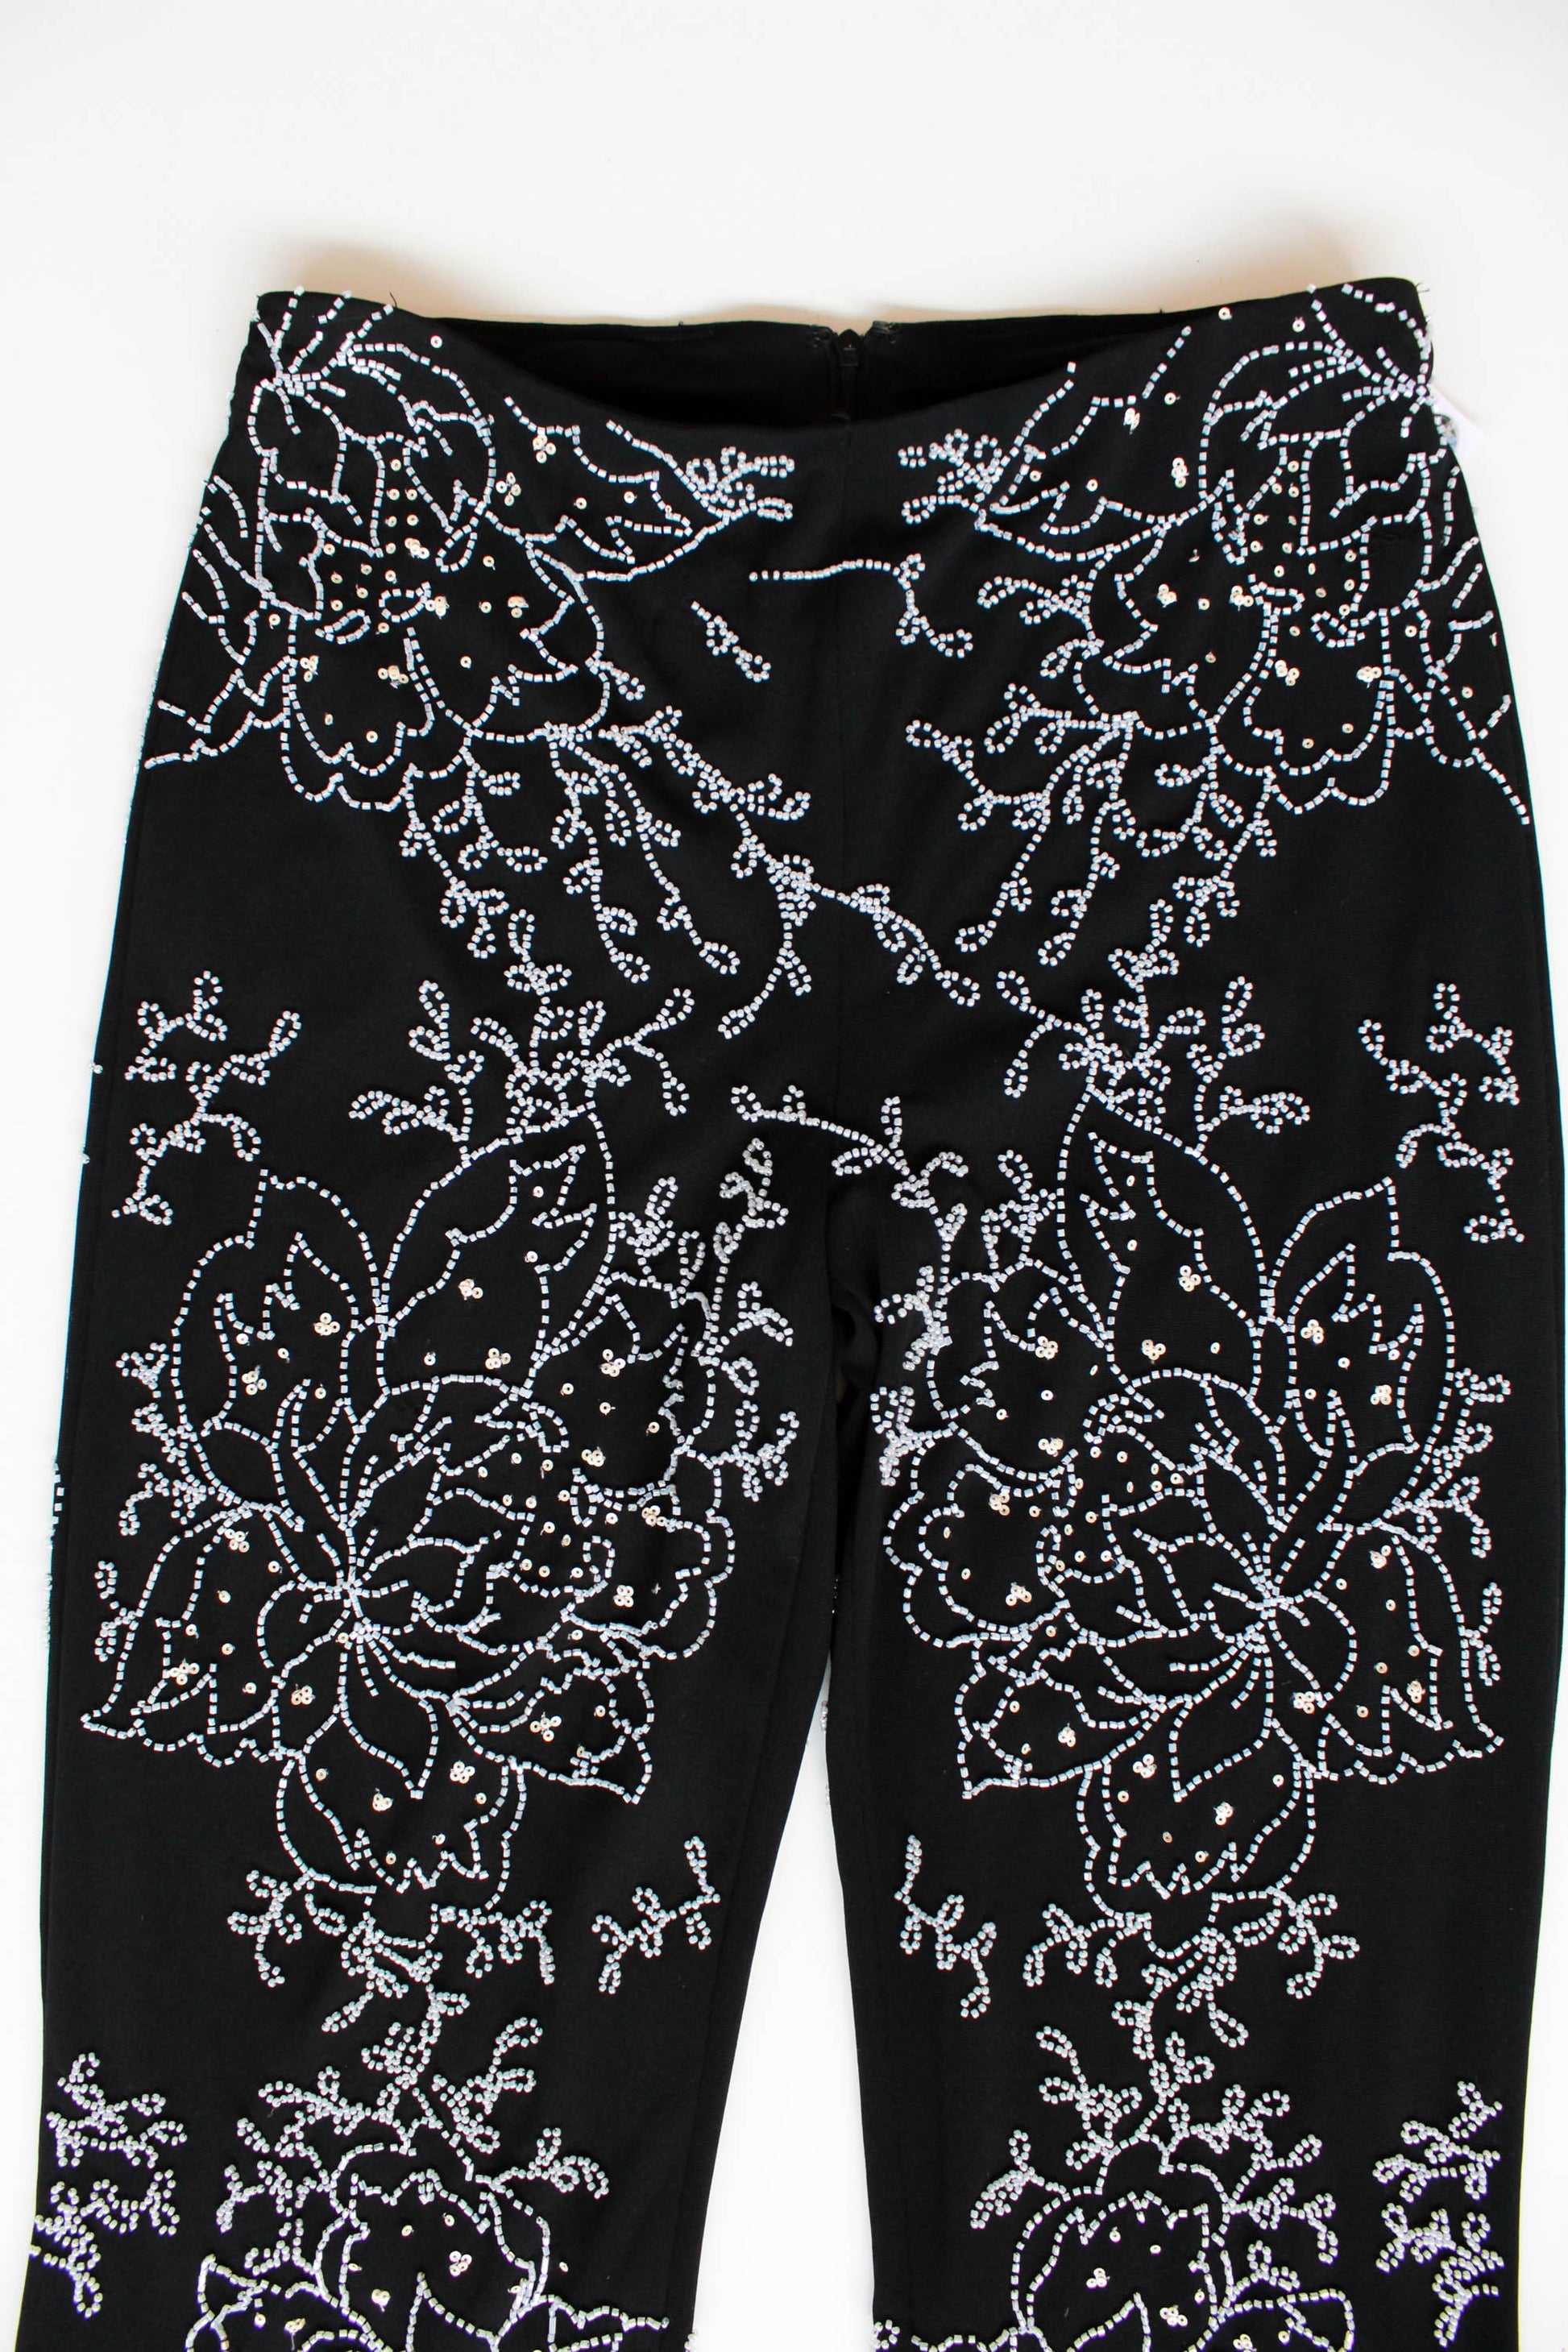 y2k silver beaded flower design sequinned black pants kick flares with stretch